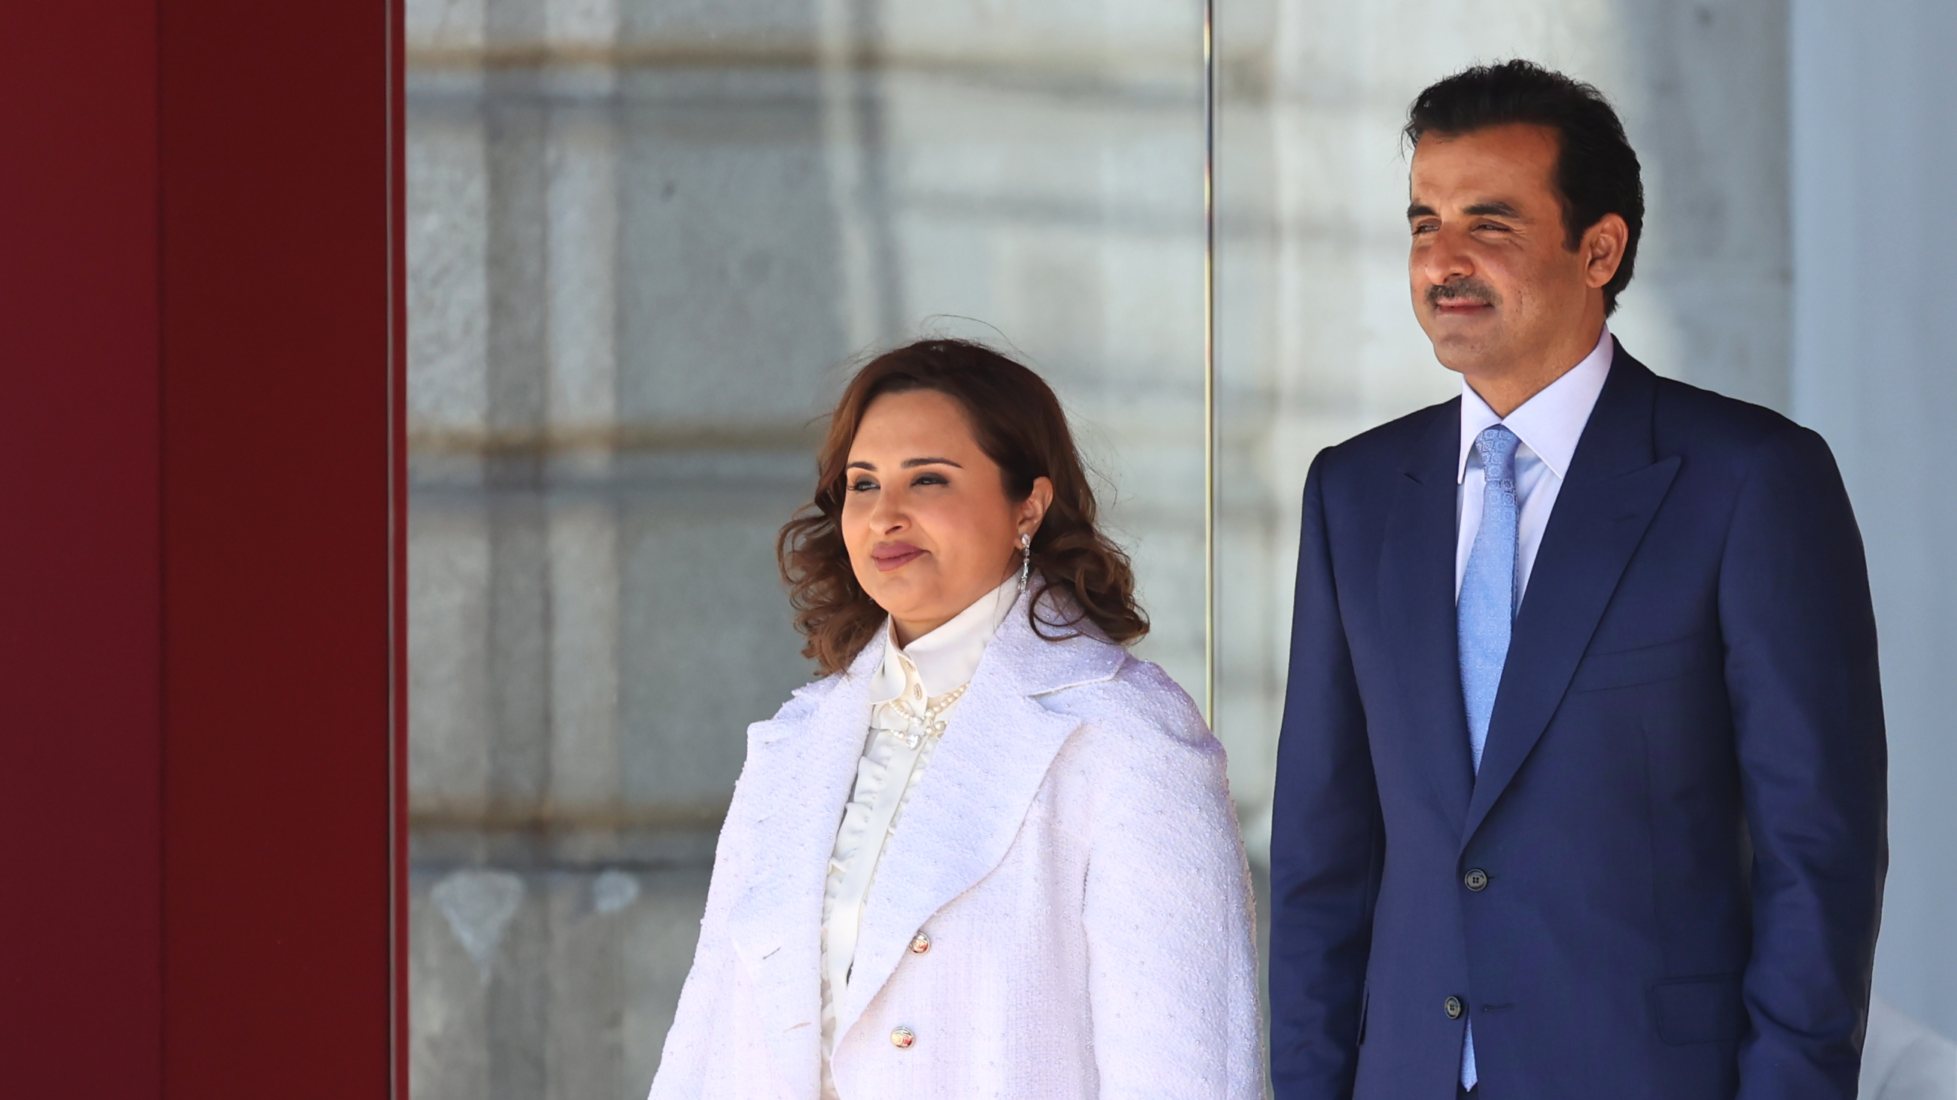 The King And Queen Of Spain Receive The Emir Of Qatar